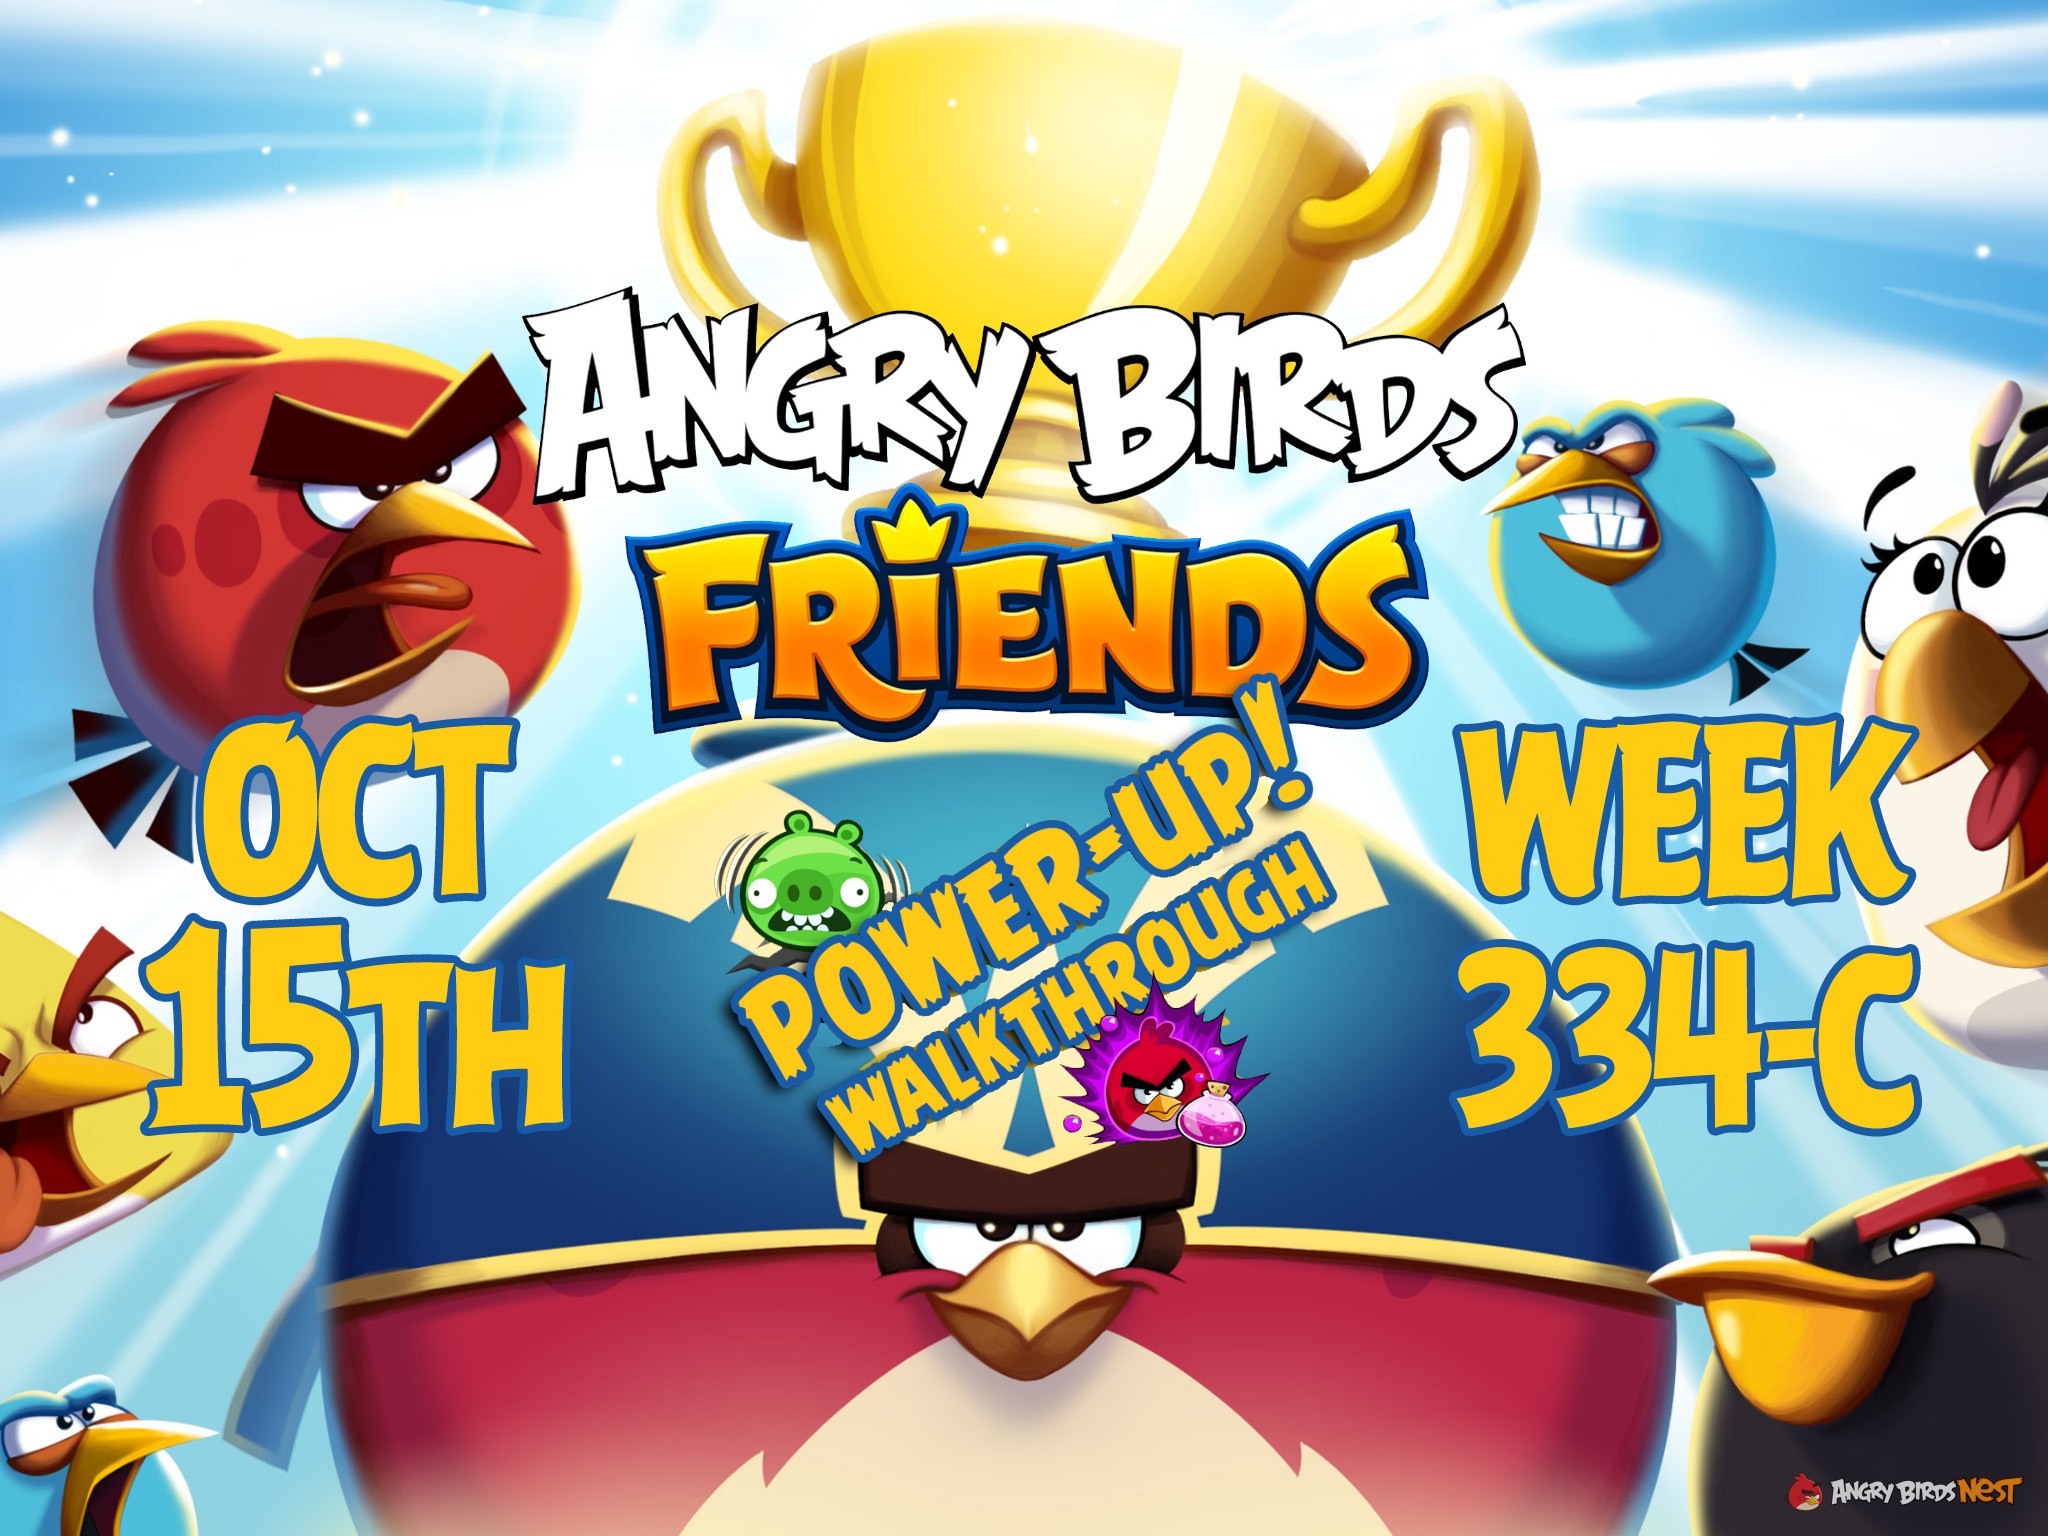 Angry-Birds-Friends-Tournament-Week-334-C-Feature-Image-PU